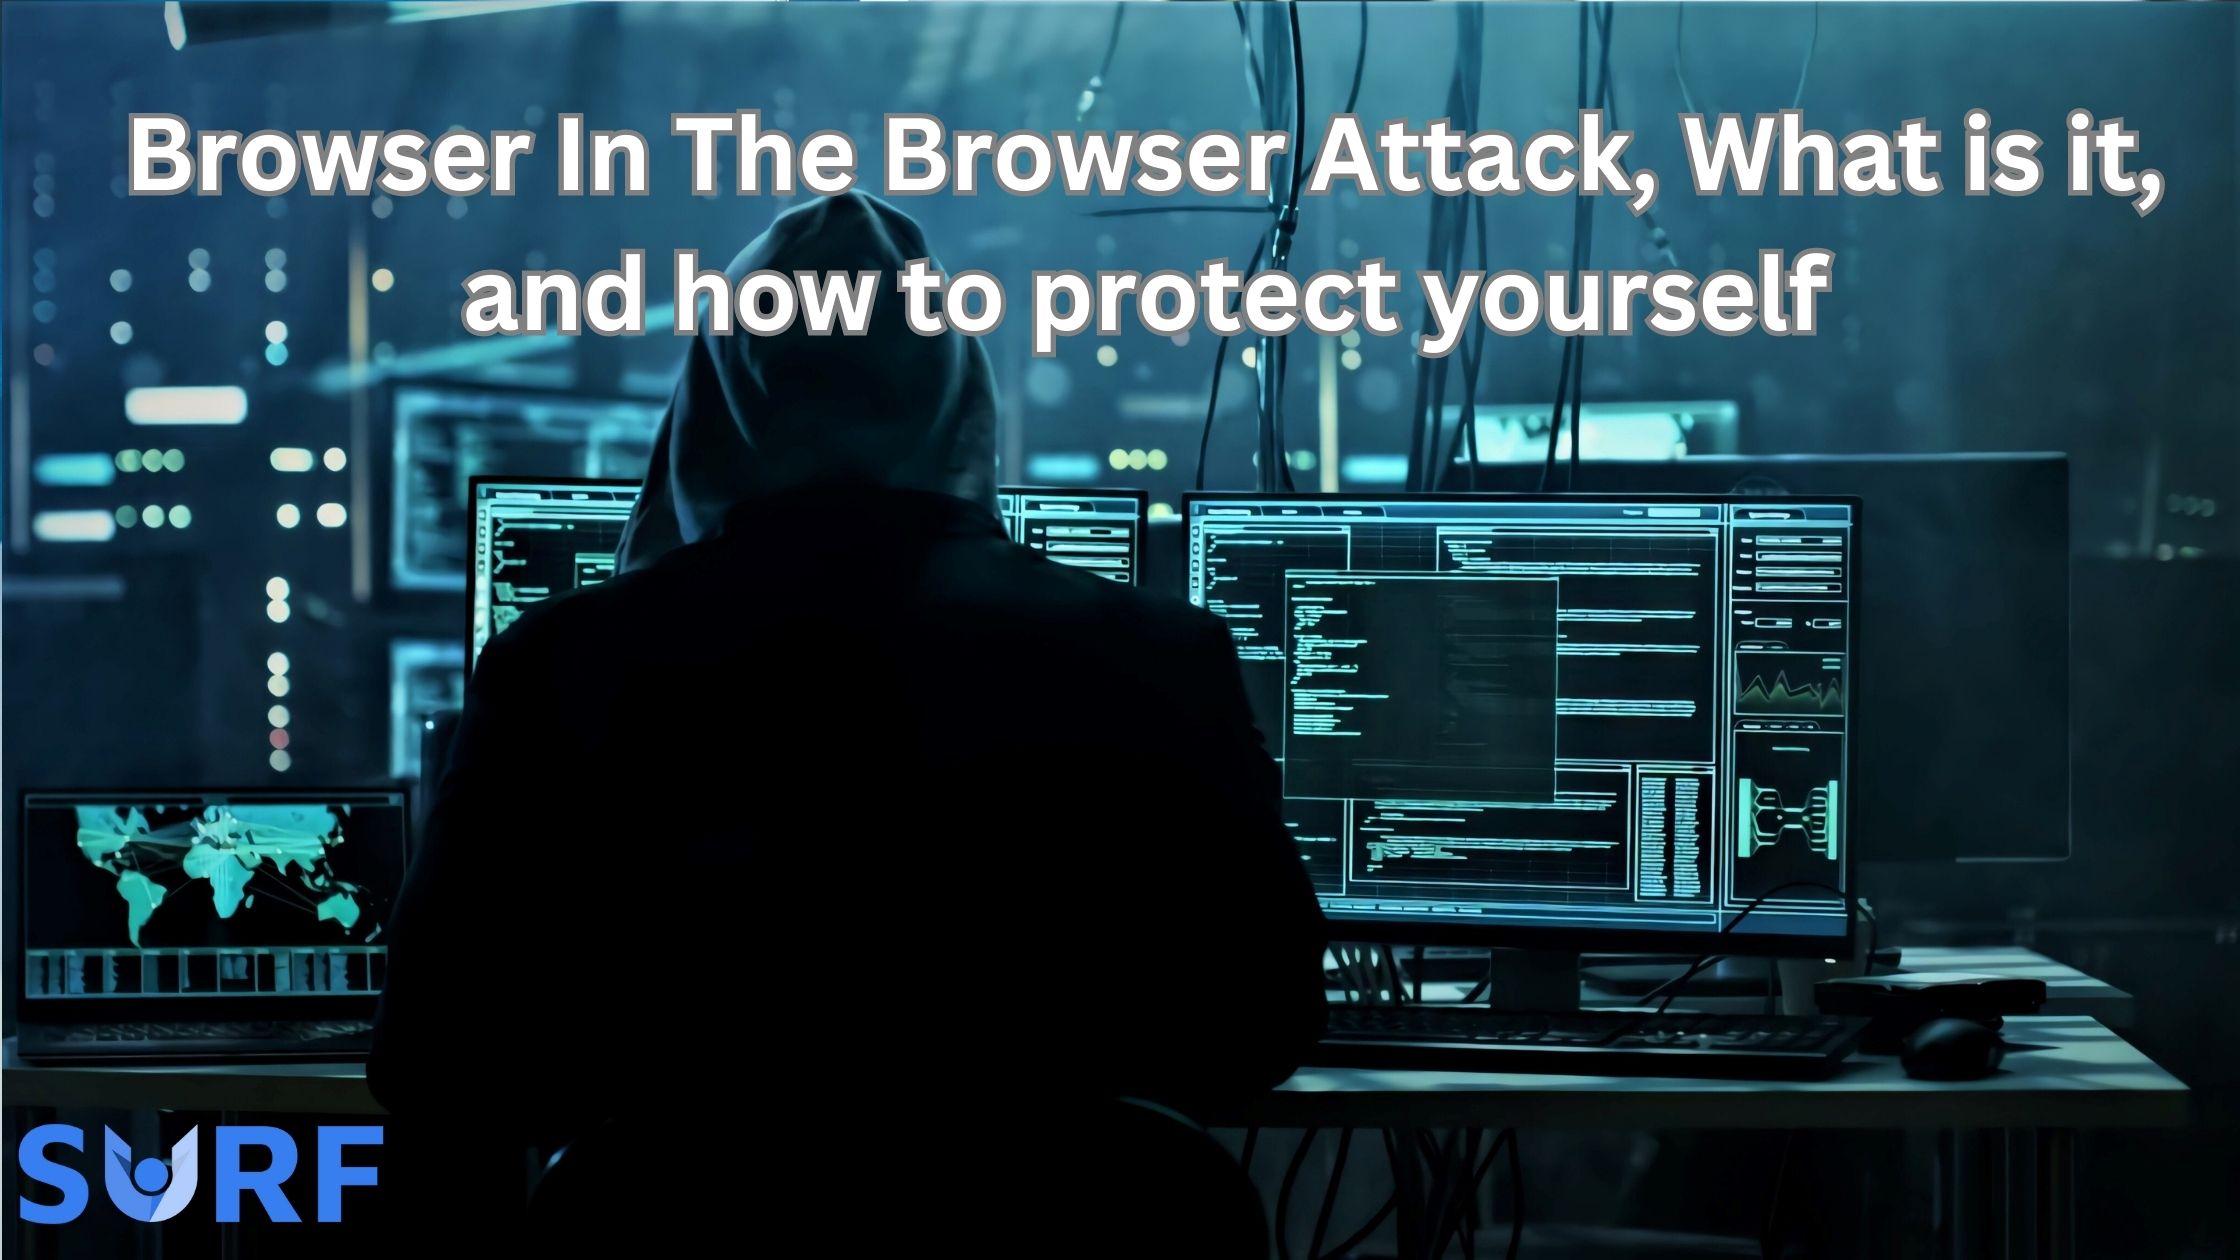 Browser In the Browser Attack